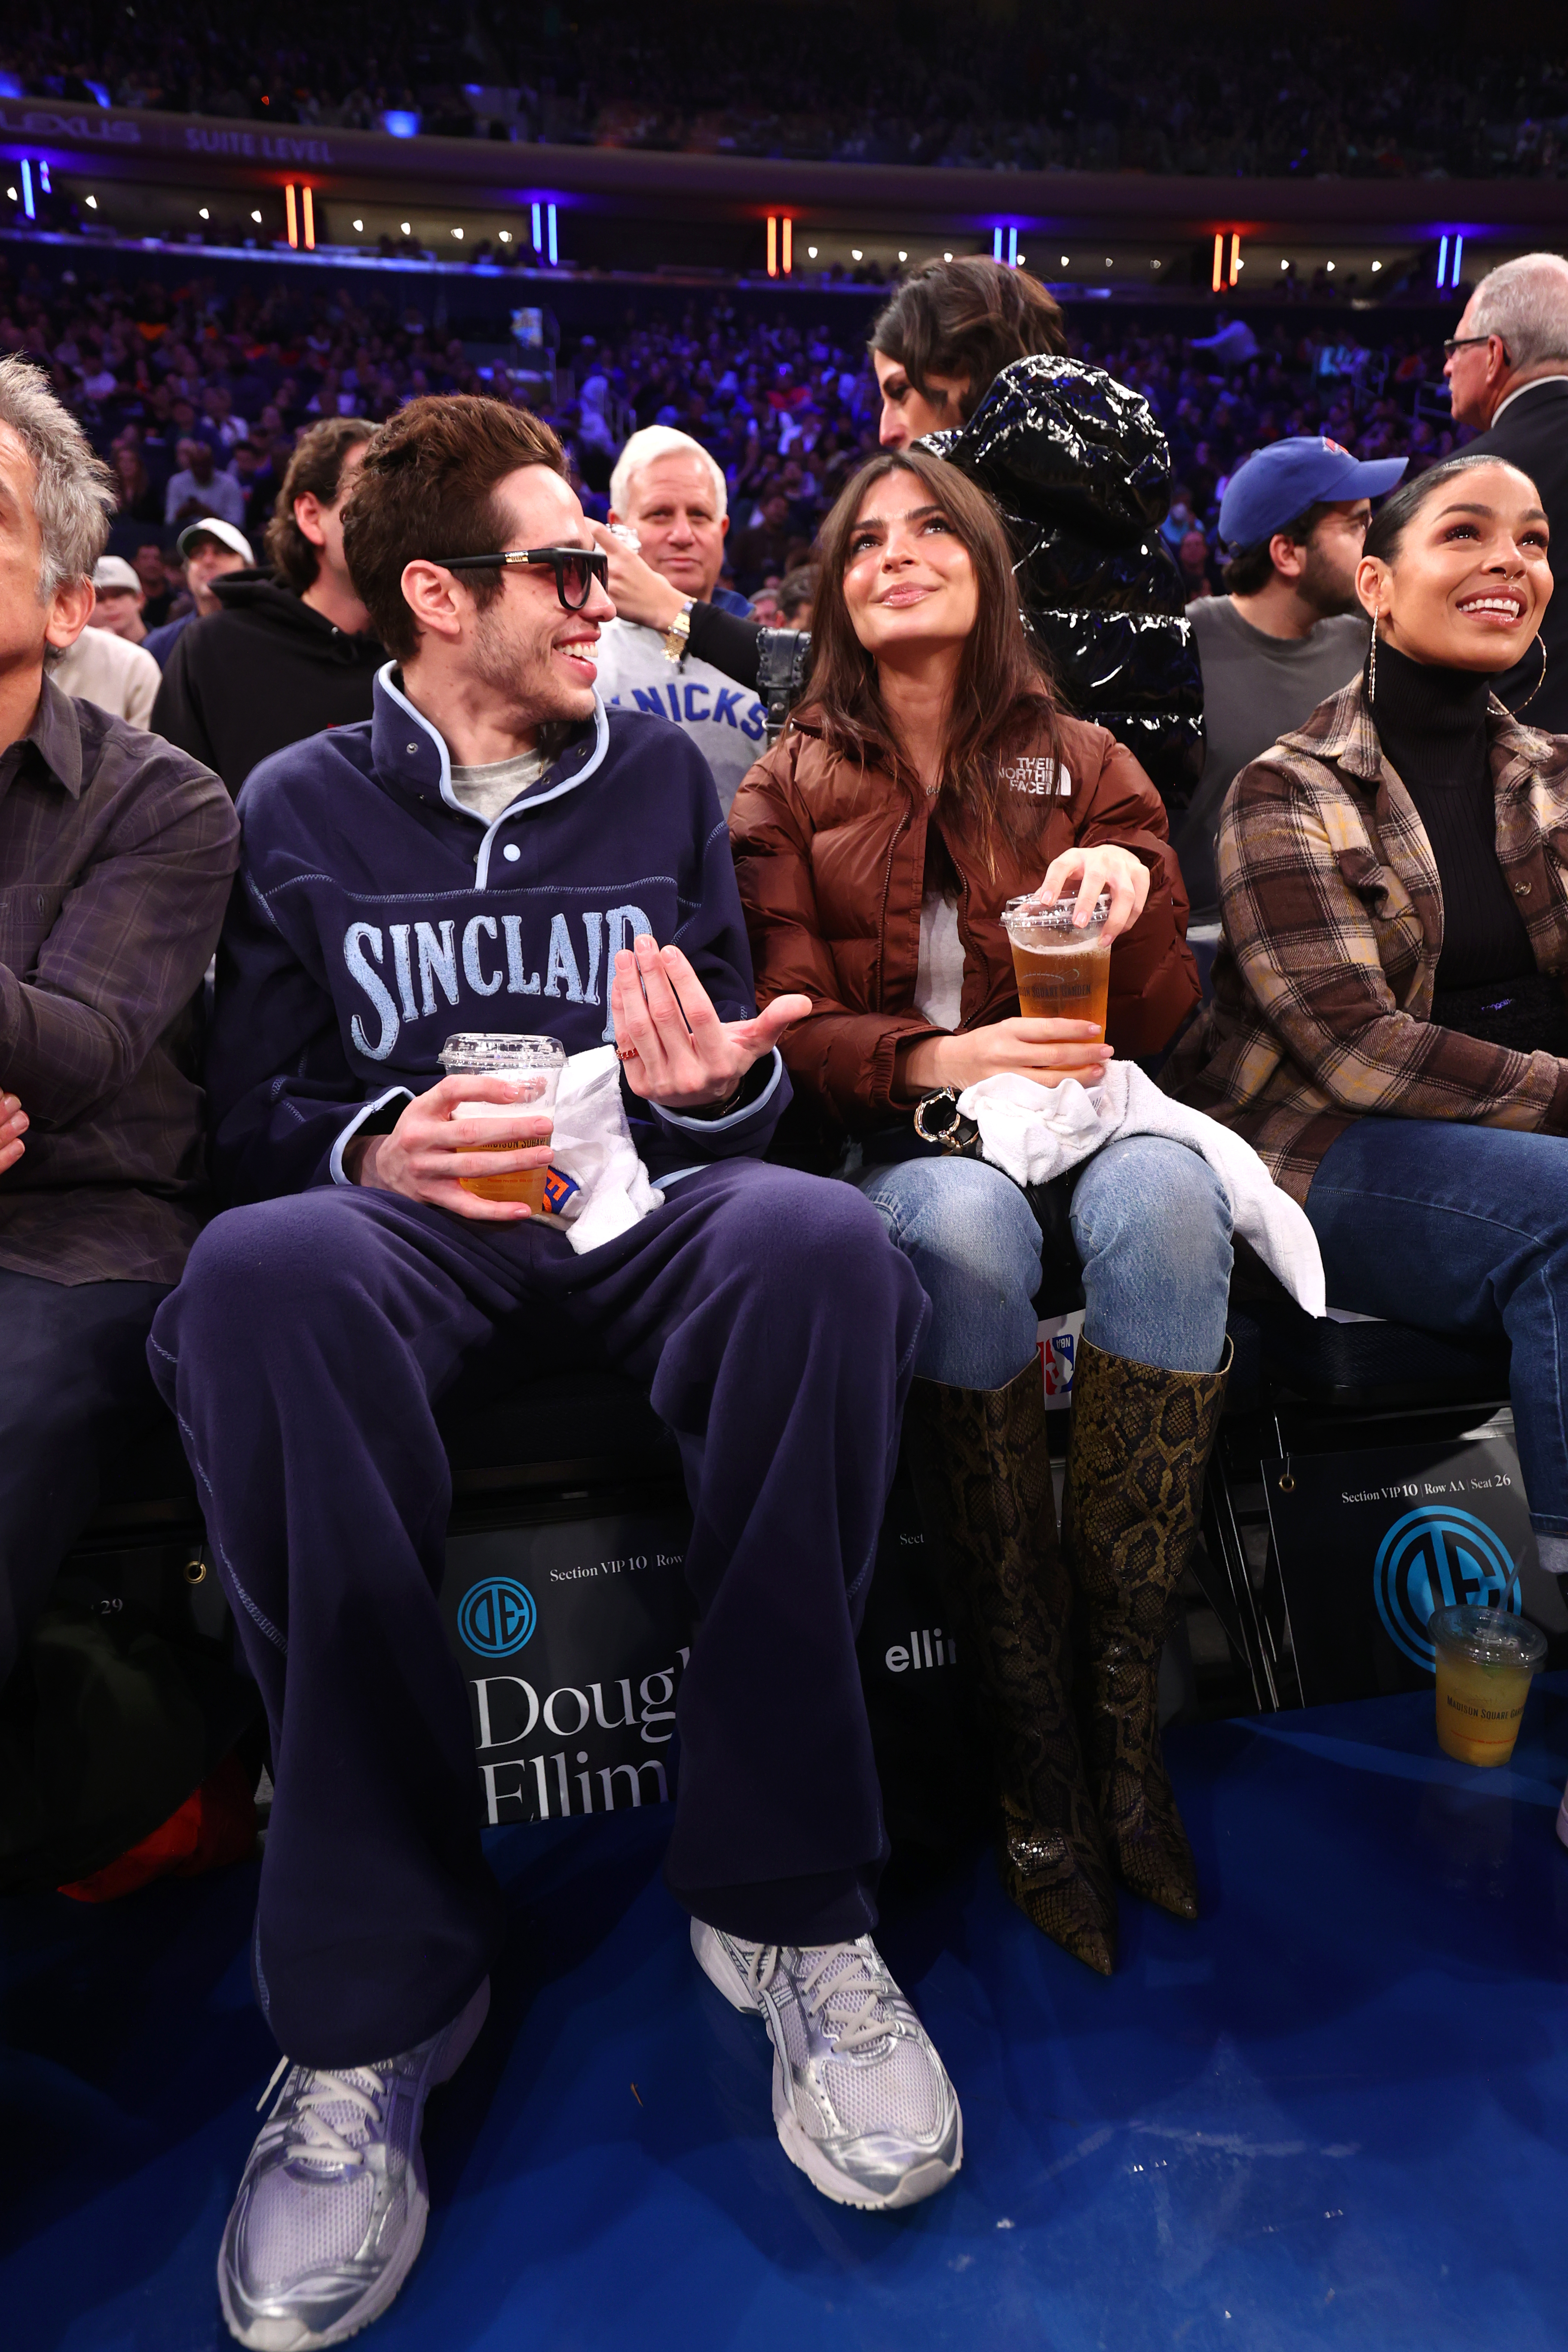 Pete and Emily sitting in the audience at a sports event